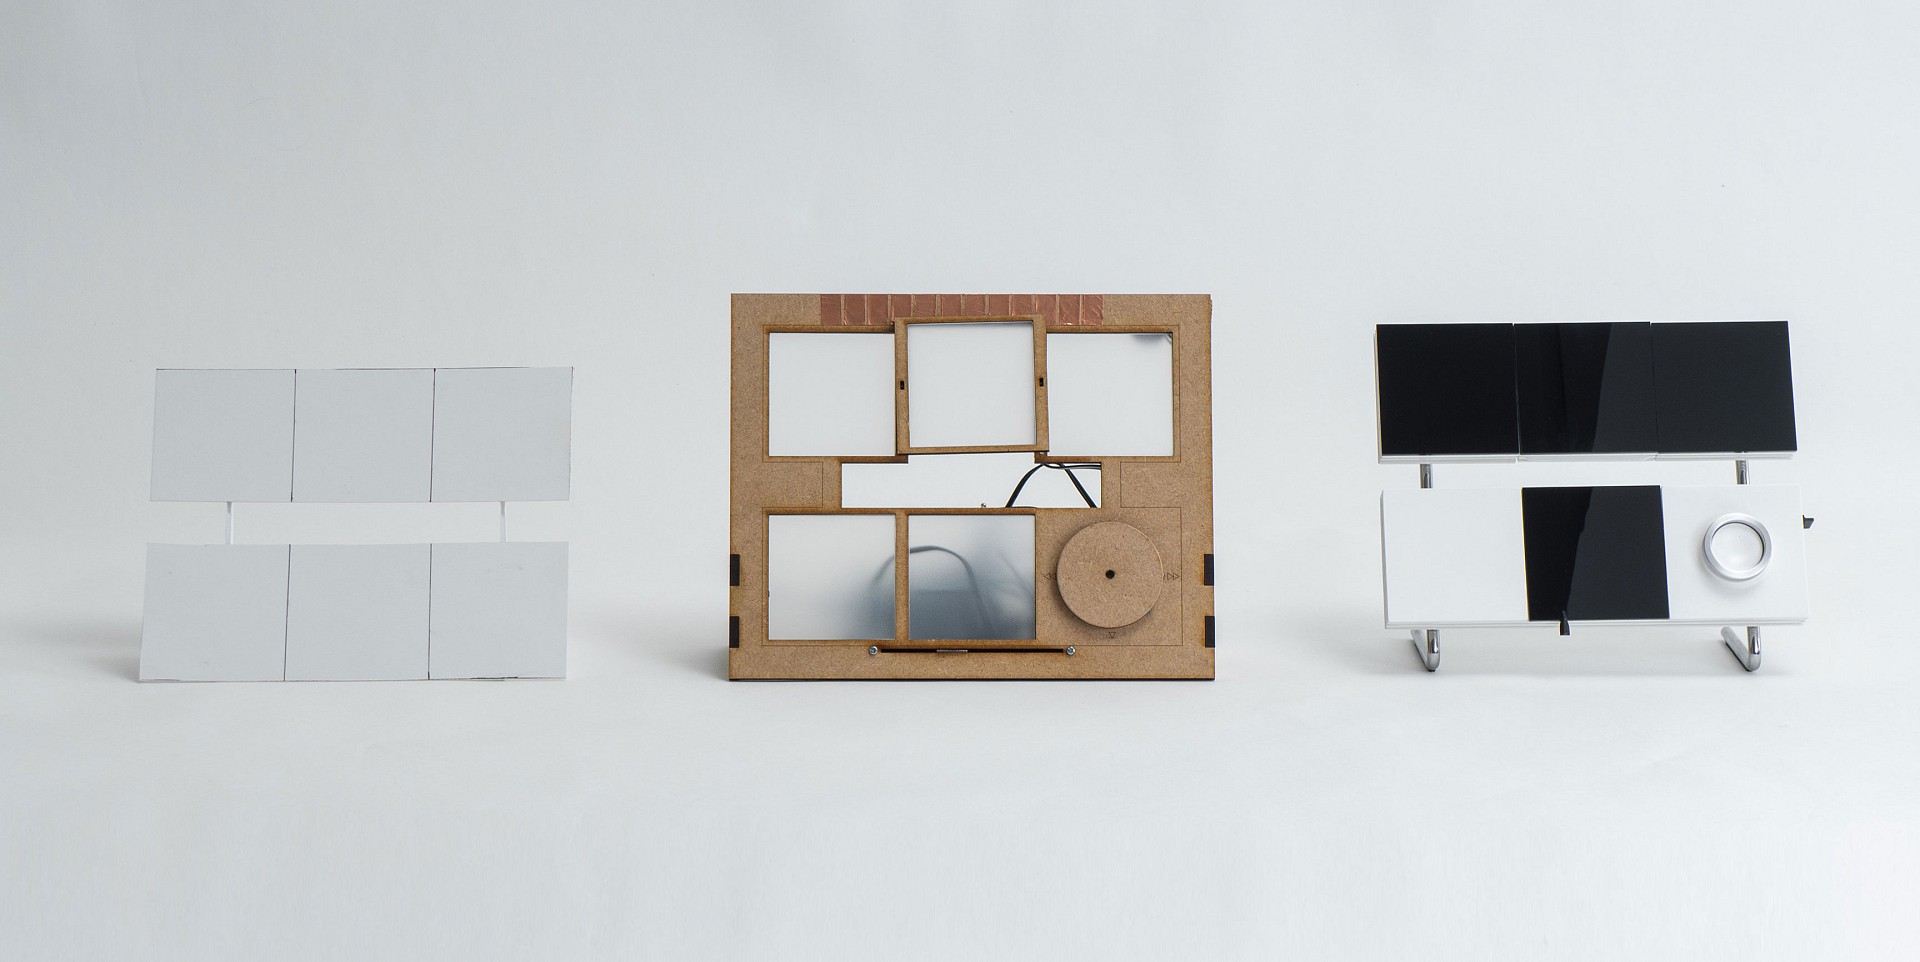 'Tiles' introduces a unique and engaging analogue music experience